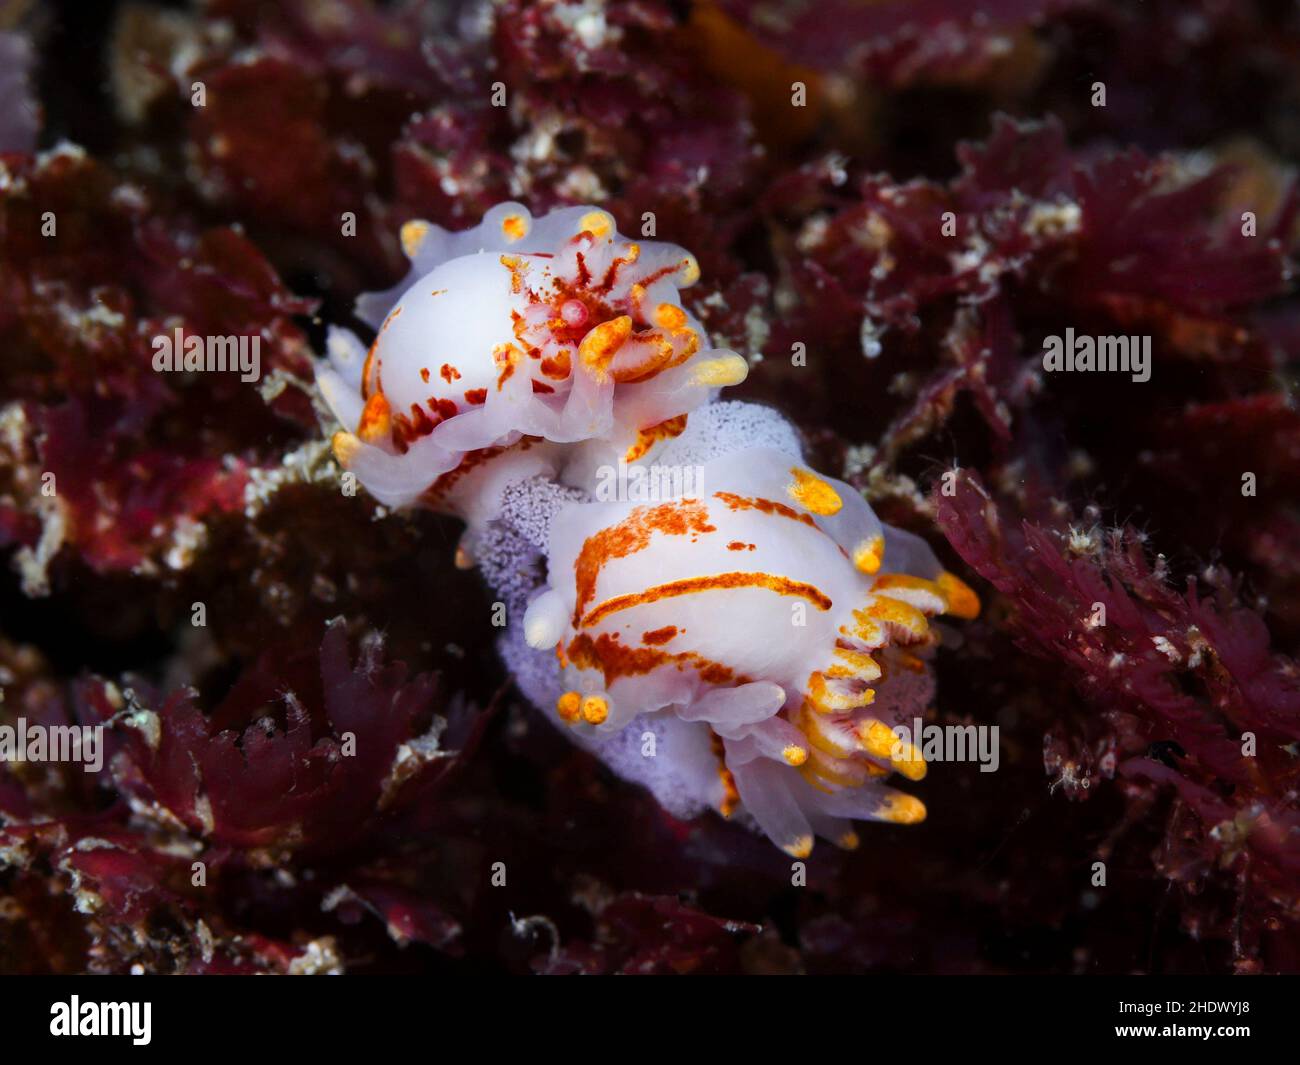 Two Fiery nudibranchs or sea slugs underwater (Okenia amoenula) sitting together with an egg mass. White bodies with orange lines and patches, numerou Stock Photo